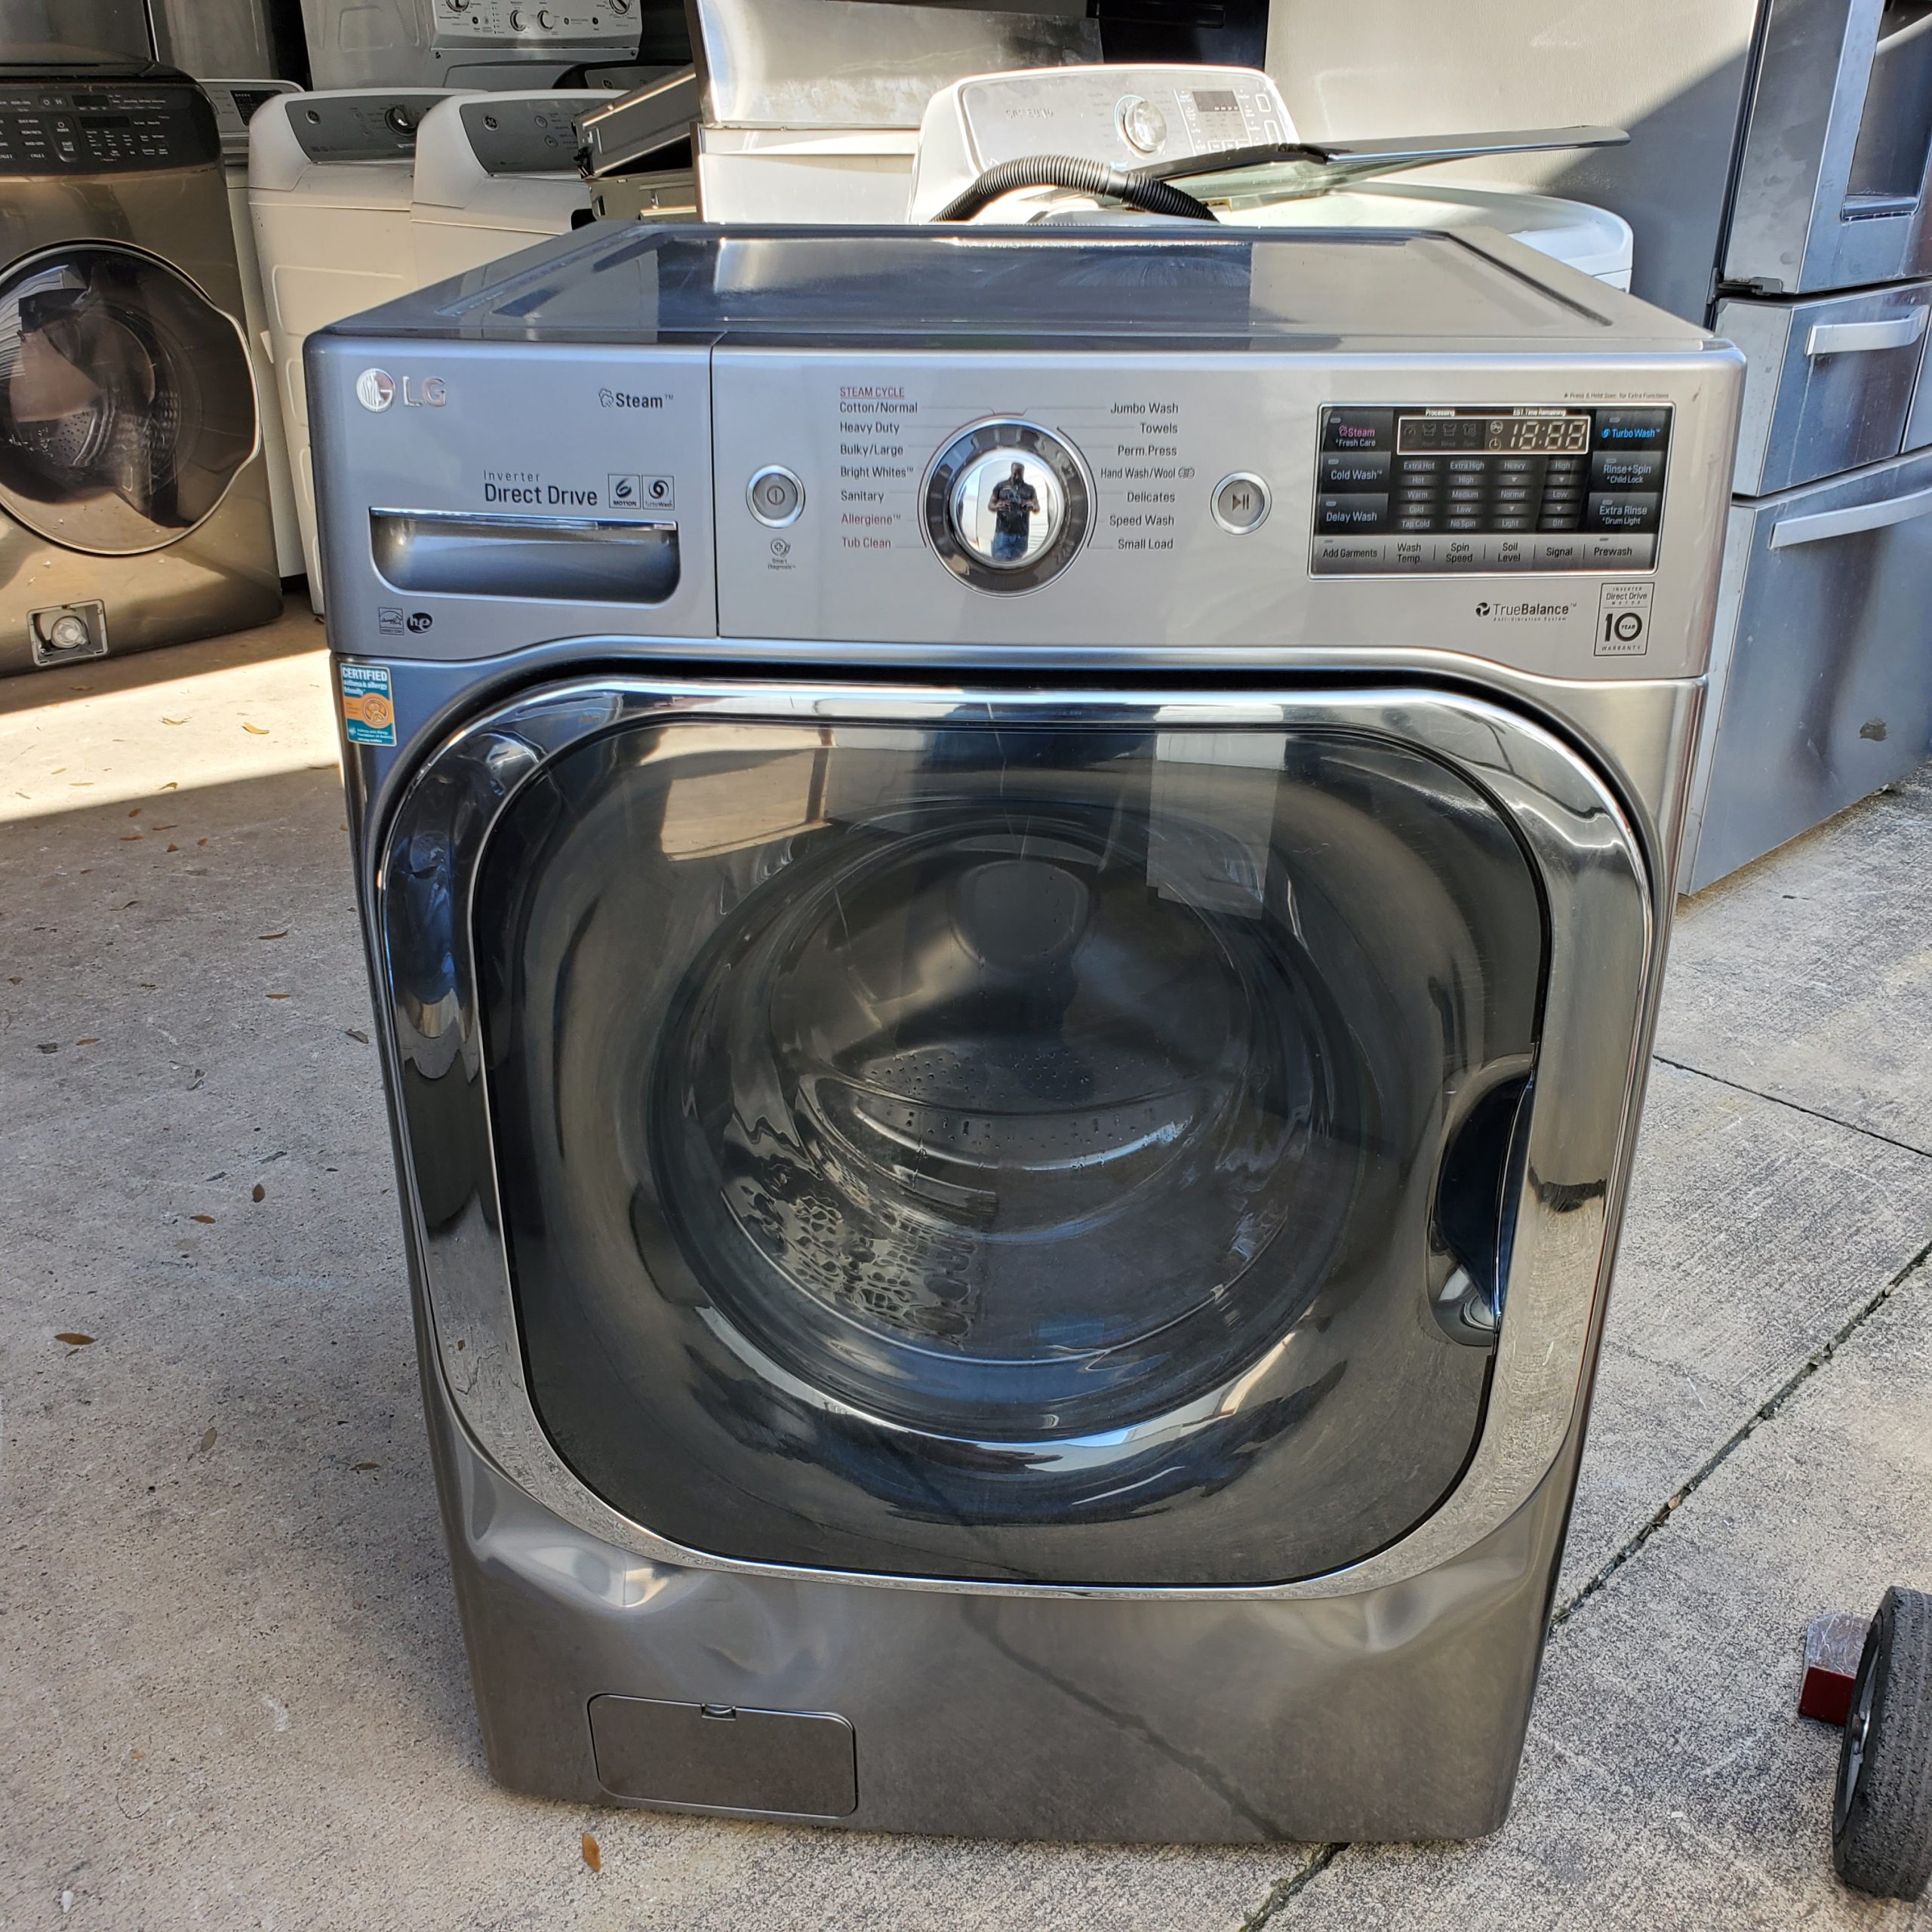 example of A broken LG Washing machine from our salvage appliance truckload program.